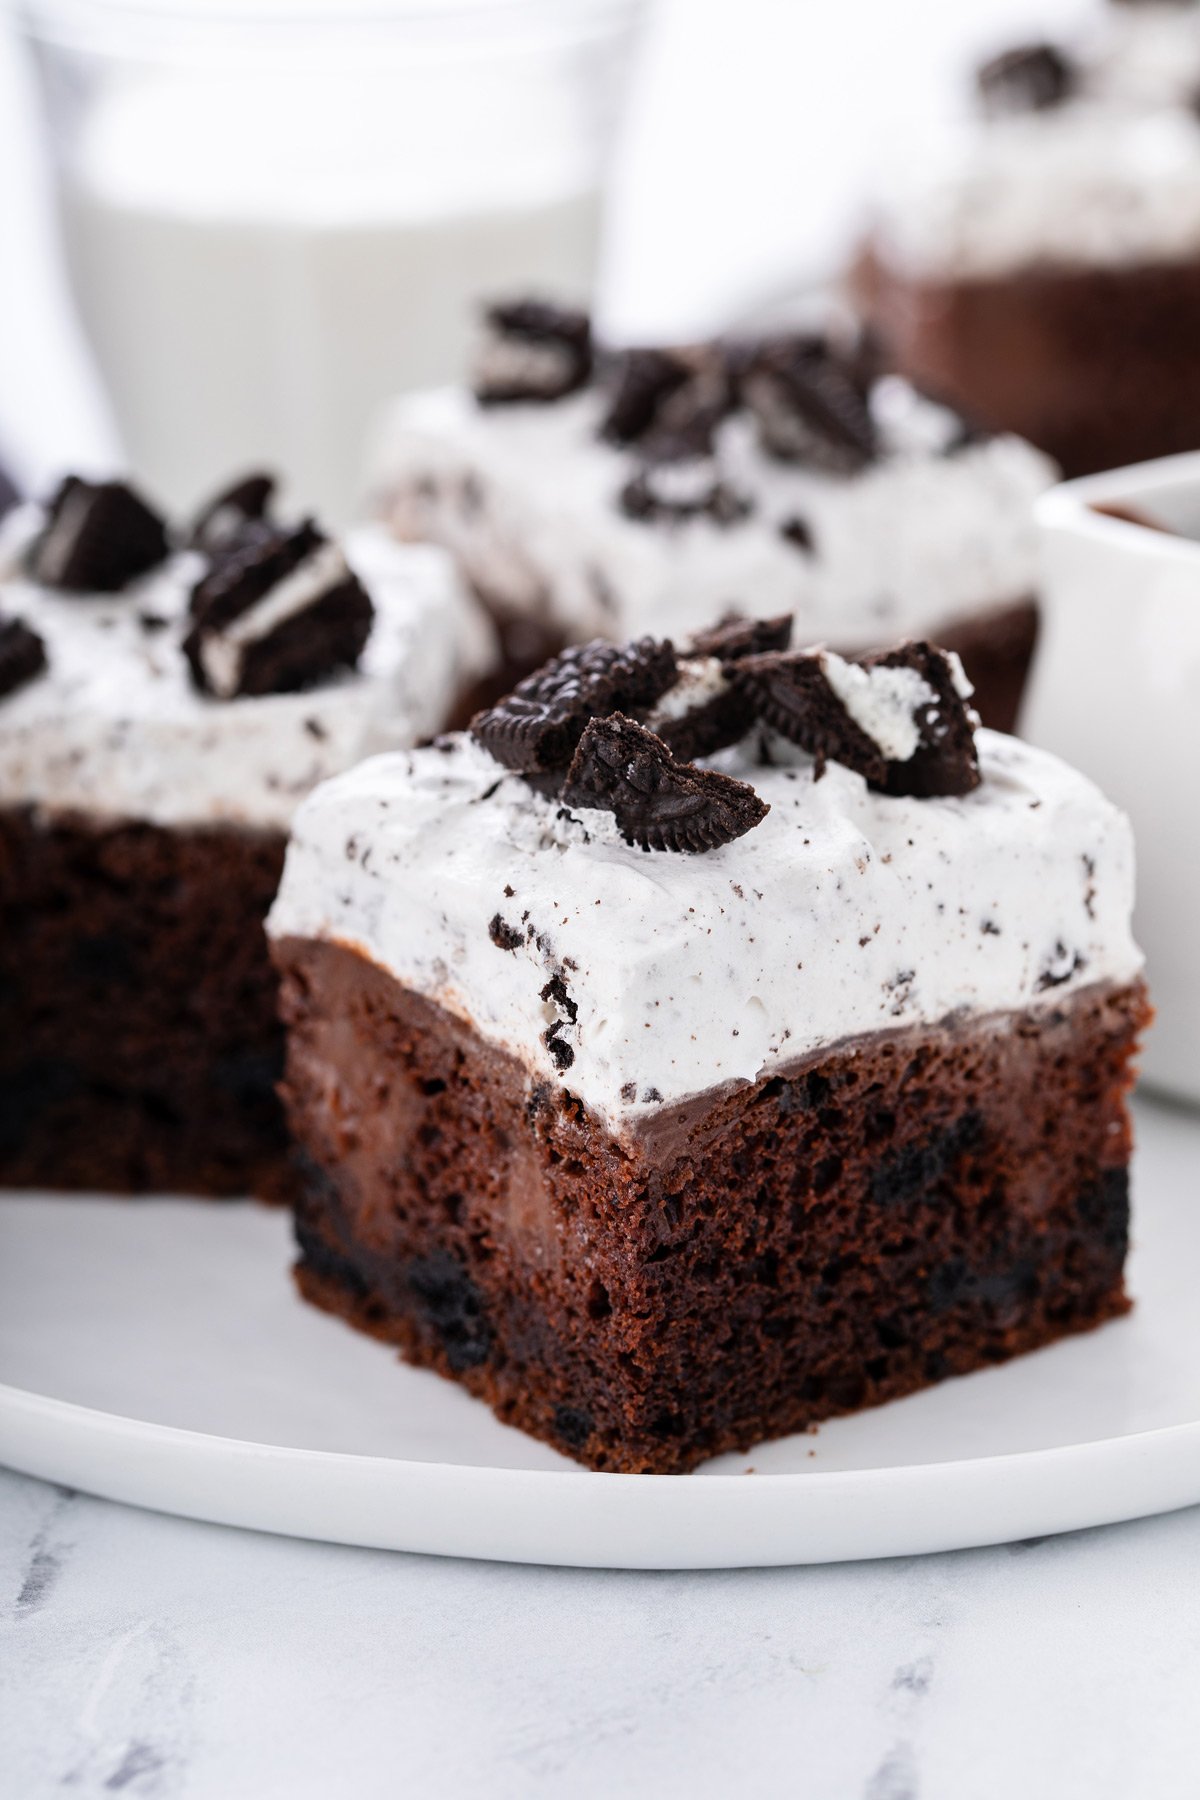 Close up image of a slice of oreo poke cake on a white plate. Two more slices and a glass of milk are visible in the background.